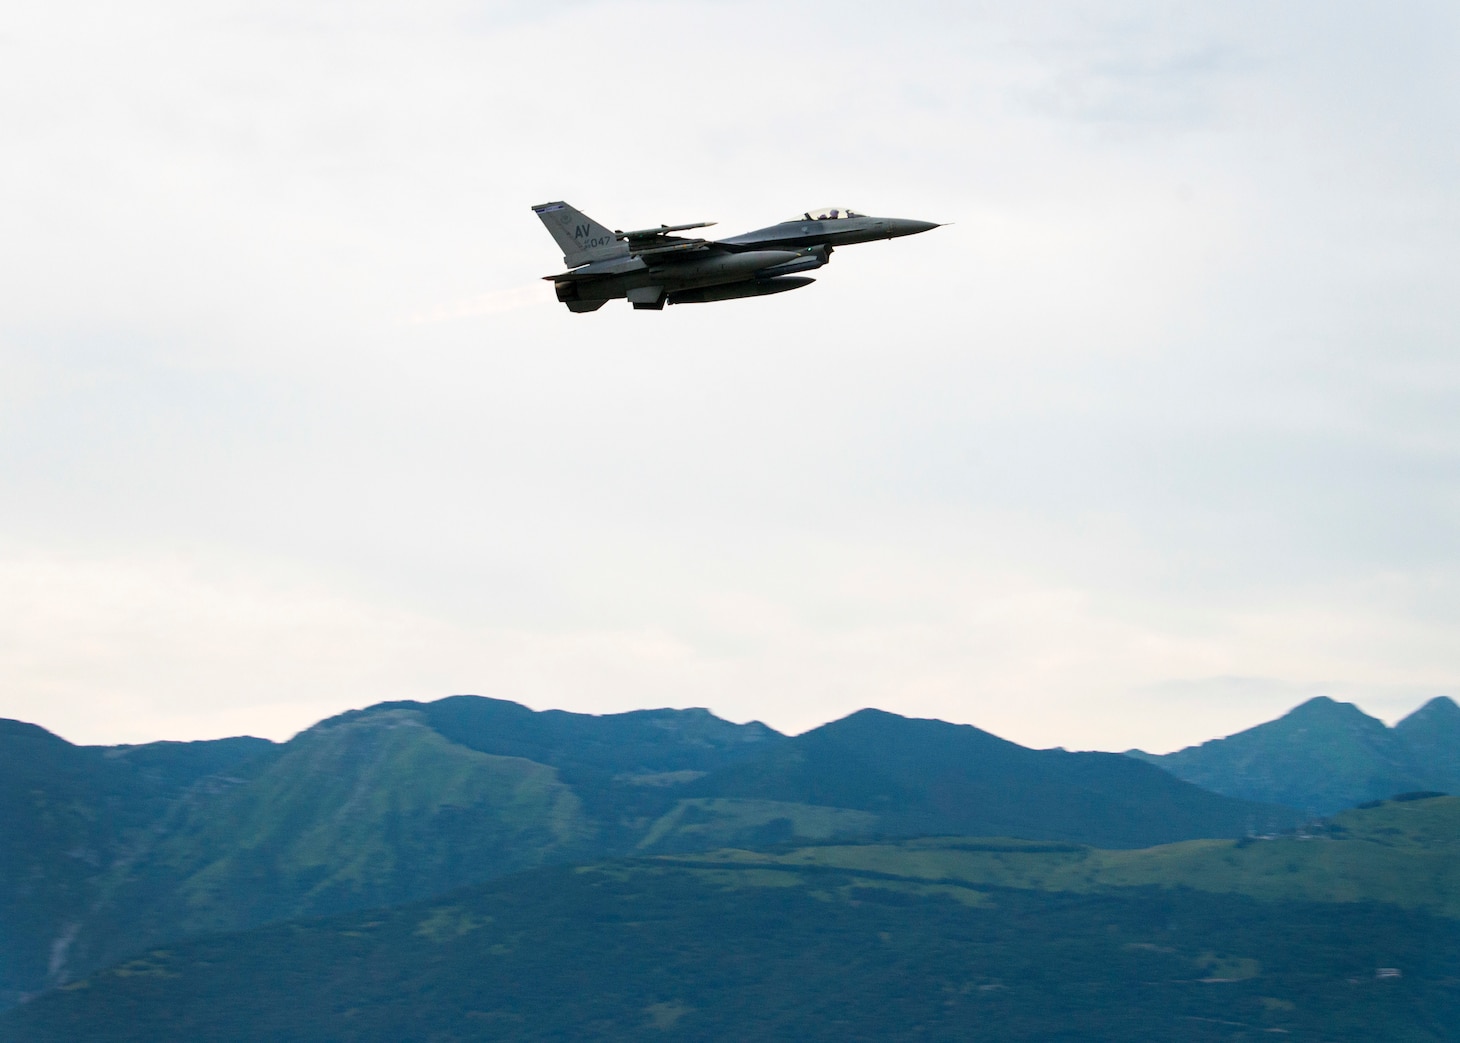 An F-16 Fighting Falcon from the 510th Fighter Squadron takes off from Aviano Air Base, Italy, Aug. 2, 2020. F-16s from the 510th FS flew integrated training missions alongside the USS Porter in the Black Sea which were designed to train U.S. forces to operate while executing multi-domain operations. (U.S. Air Force photo by Tech. Sgt. Rebeccah Woodrow)